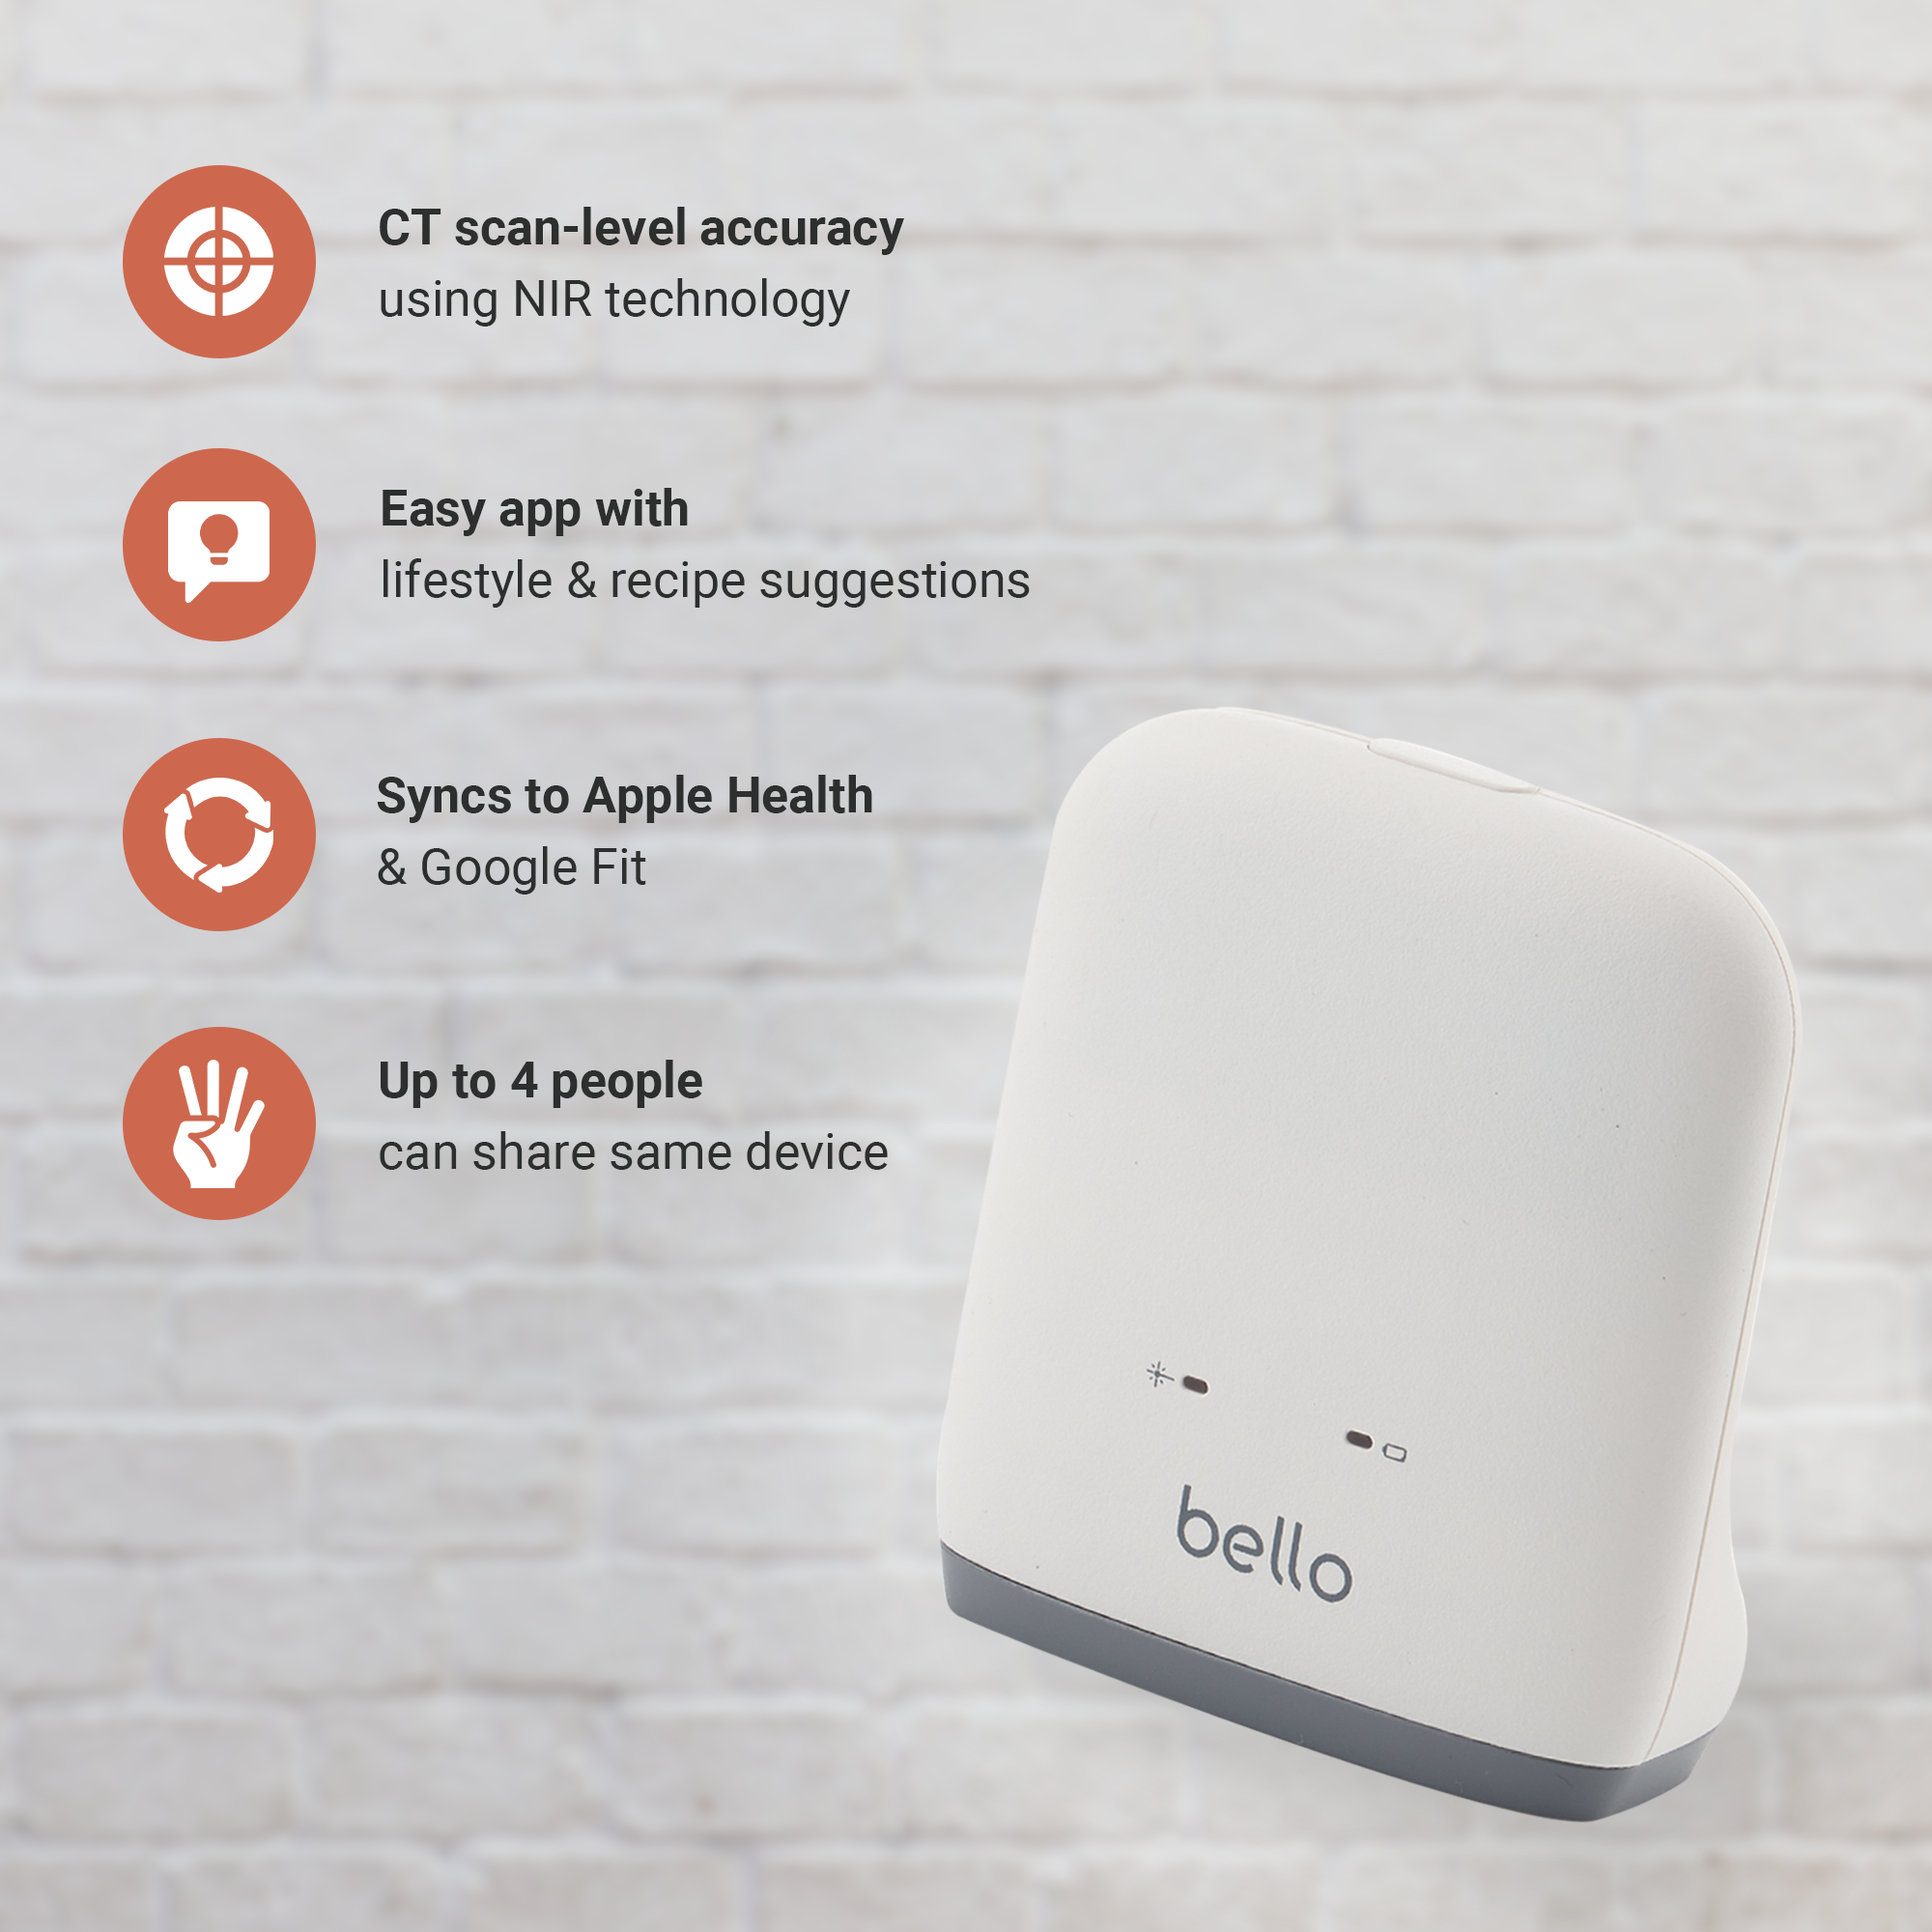 Bello - Belly Fat Management Device with Smart App - Handheld Body